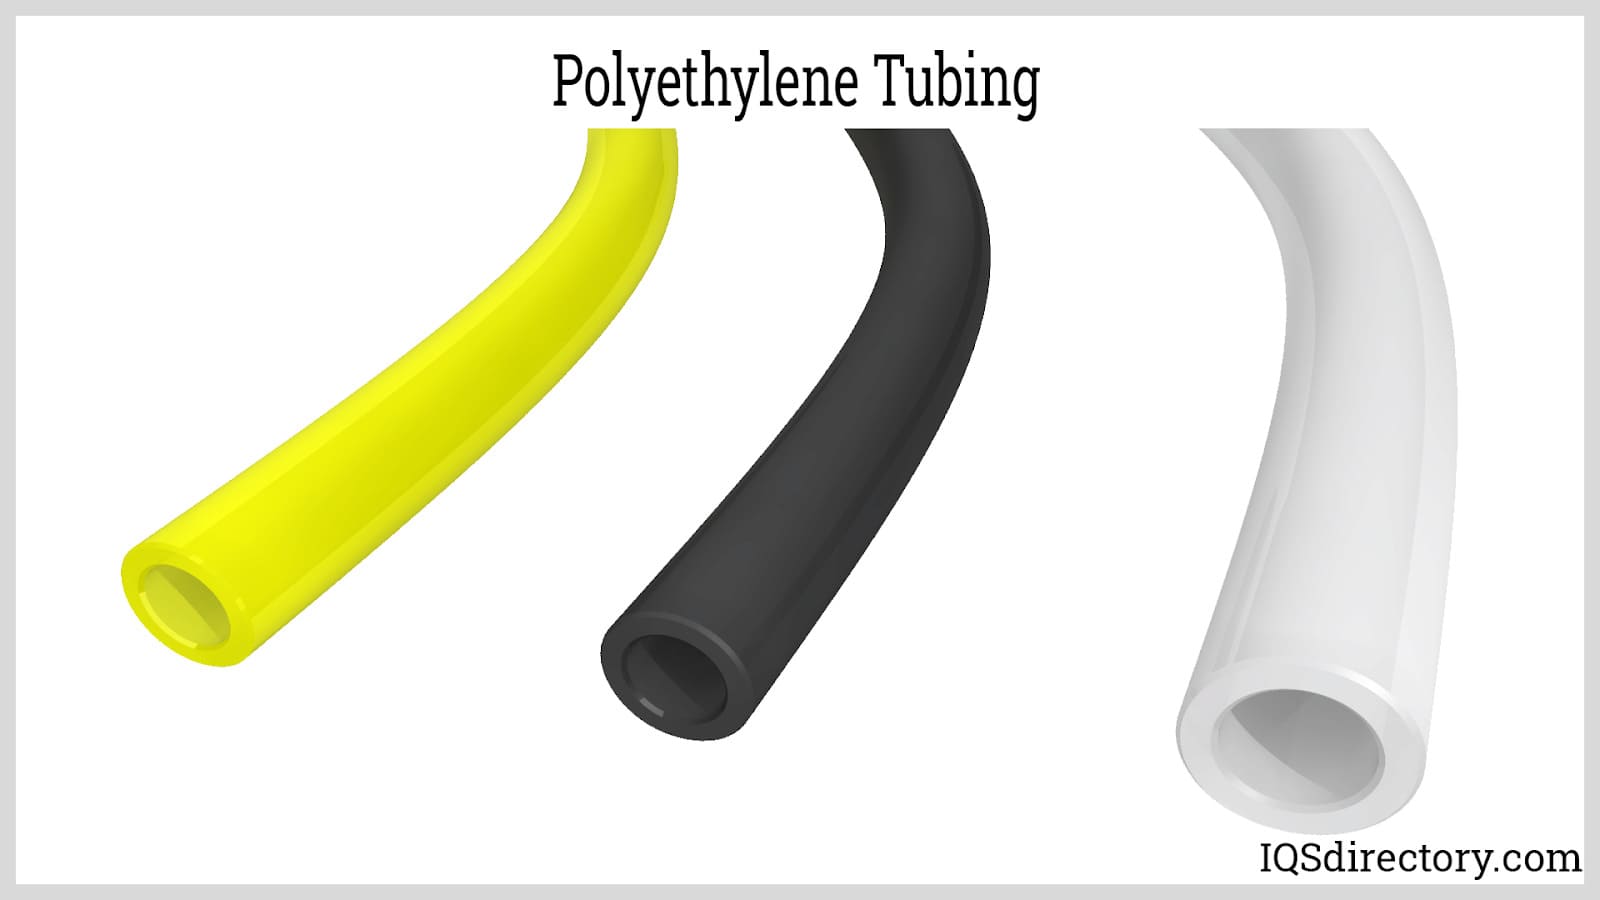 All About Polypropylene: How it's Made and Used